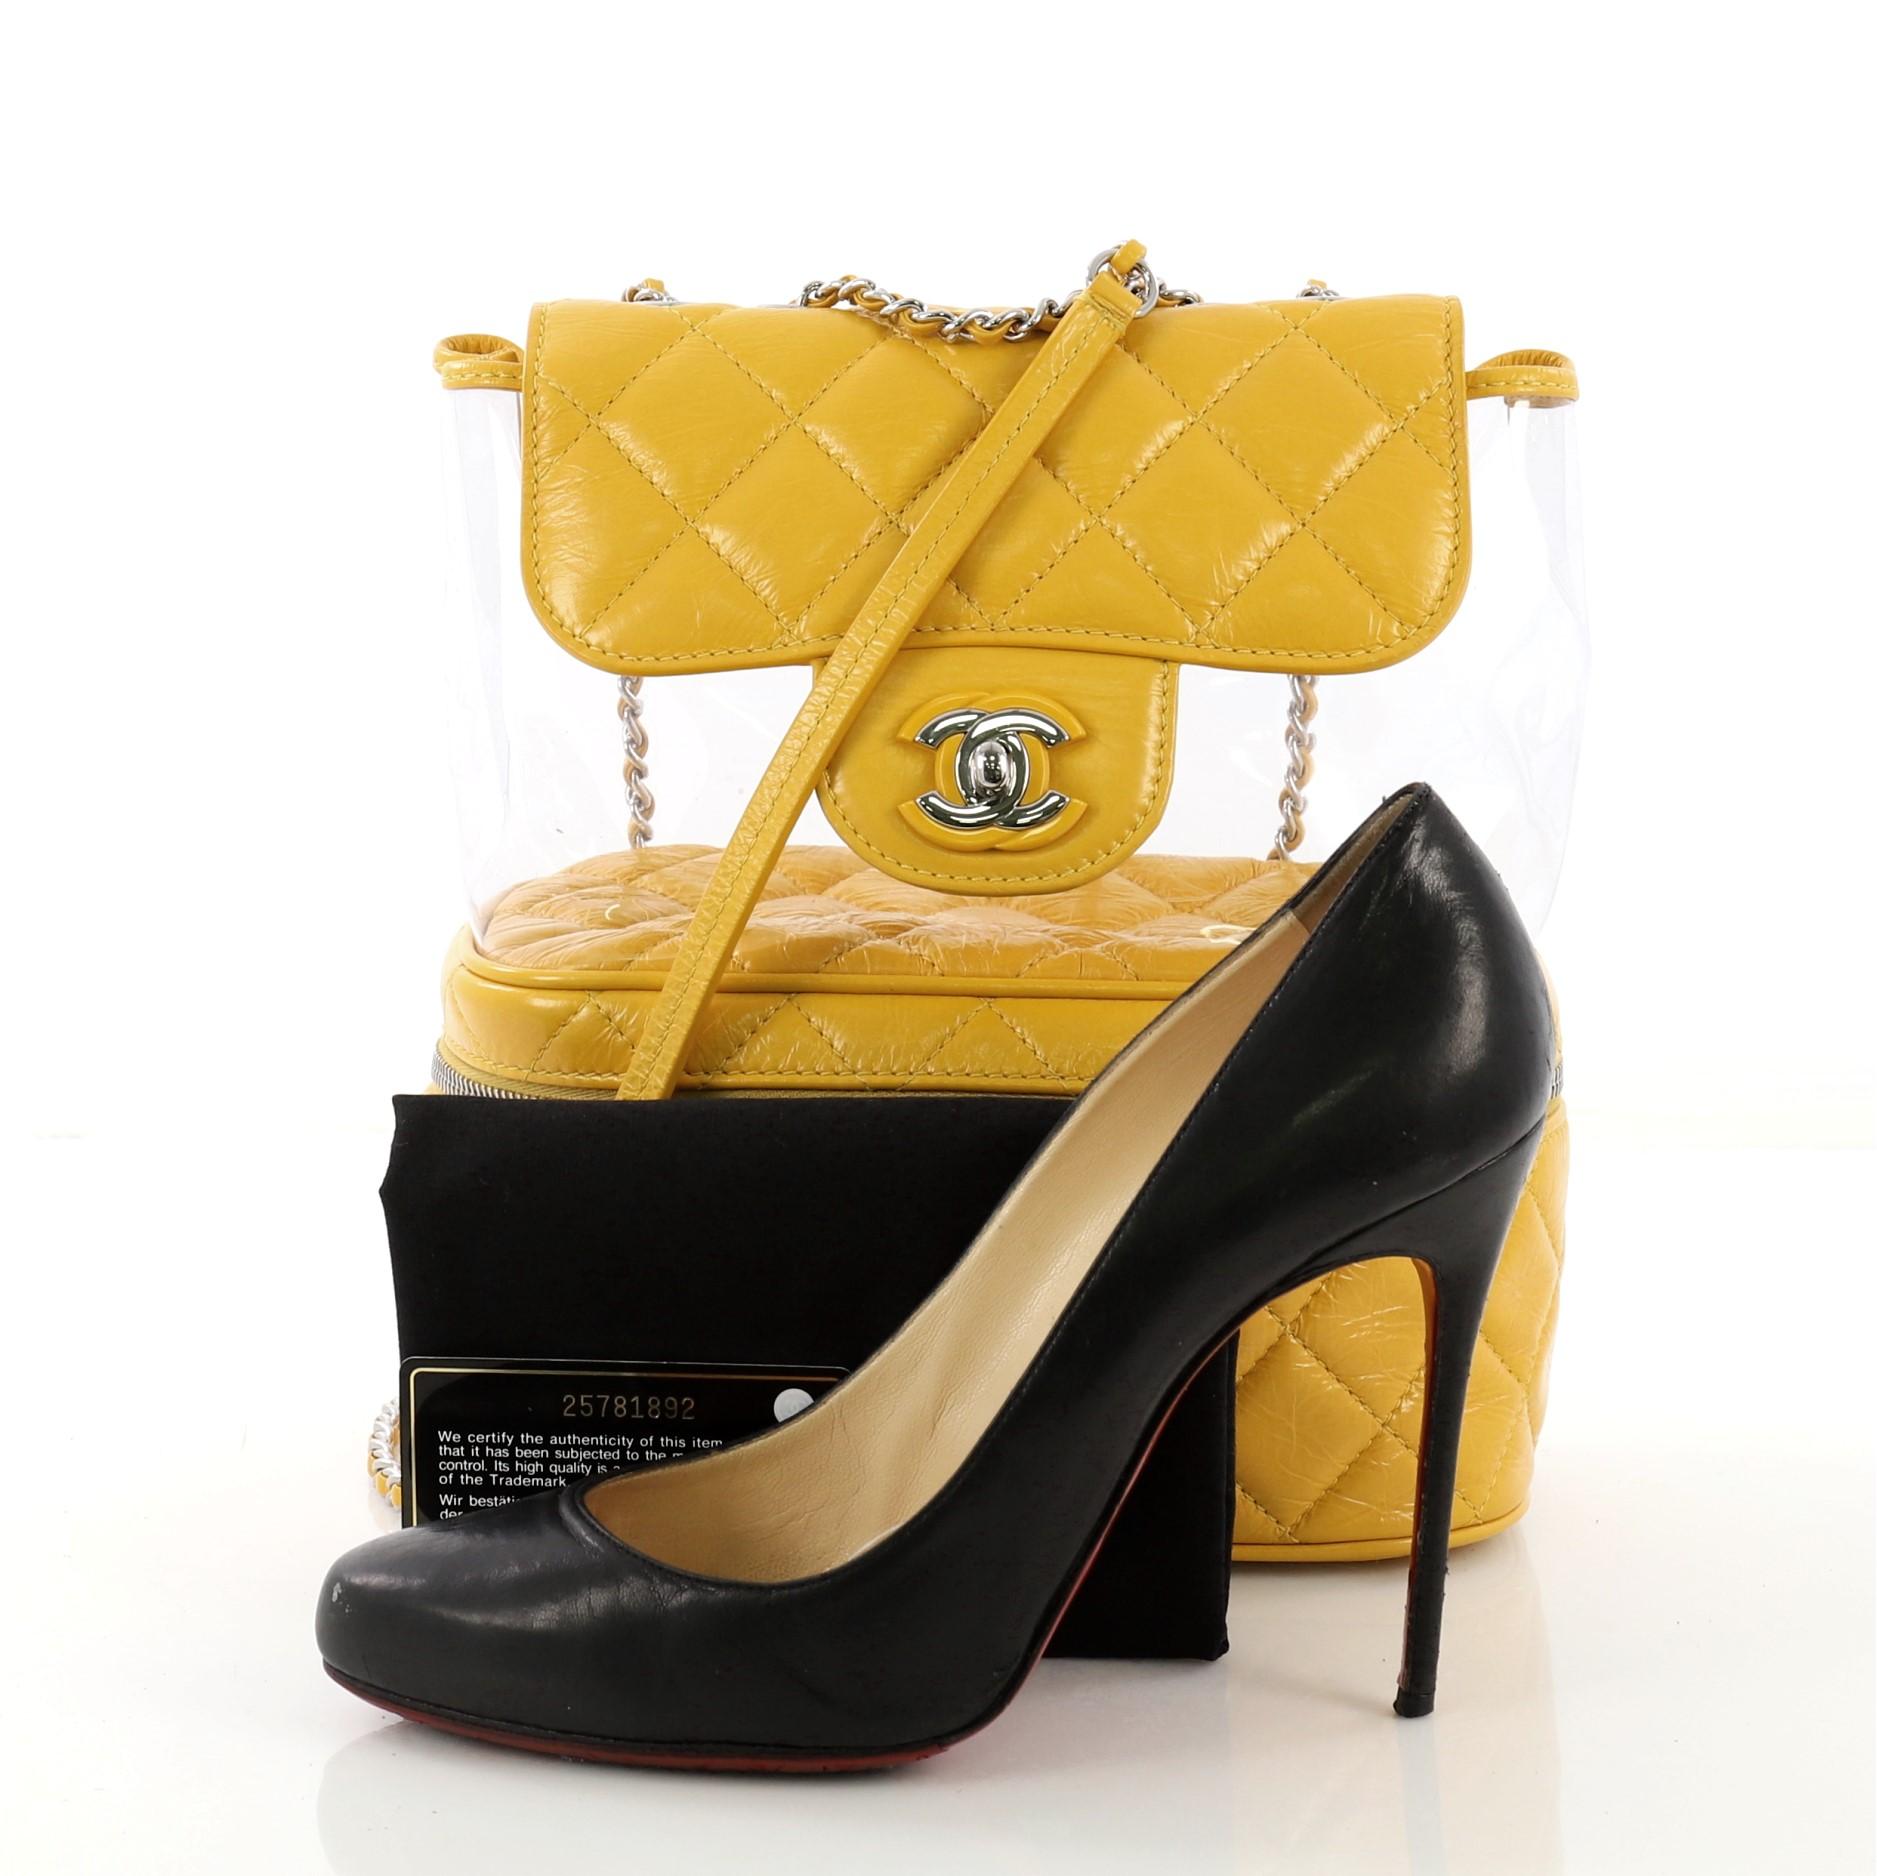 This Chanel Zip around Flap Bag Quilted Crumpled Calfskin and PVC Small, crafted from yellow quilted crumpled calfskin and clear PVC, features woven-in-leather chain straps, flap compartment with CC turn-lock closure, and silver-tone hardware. Its